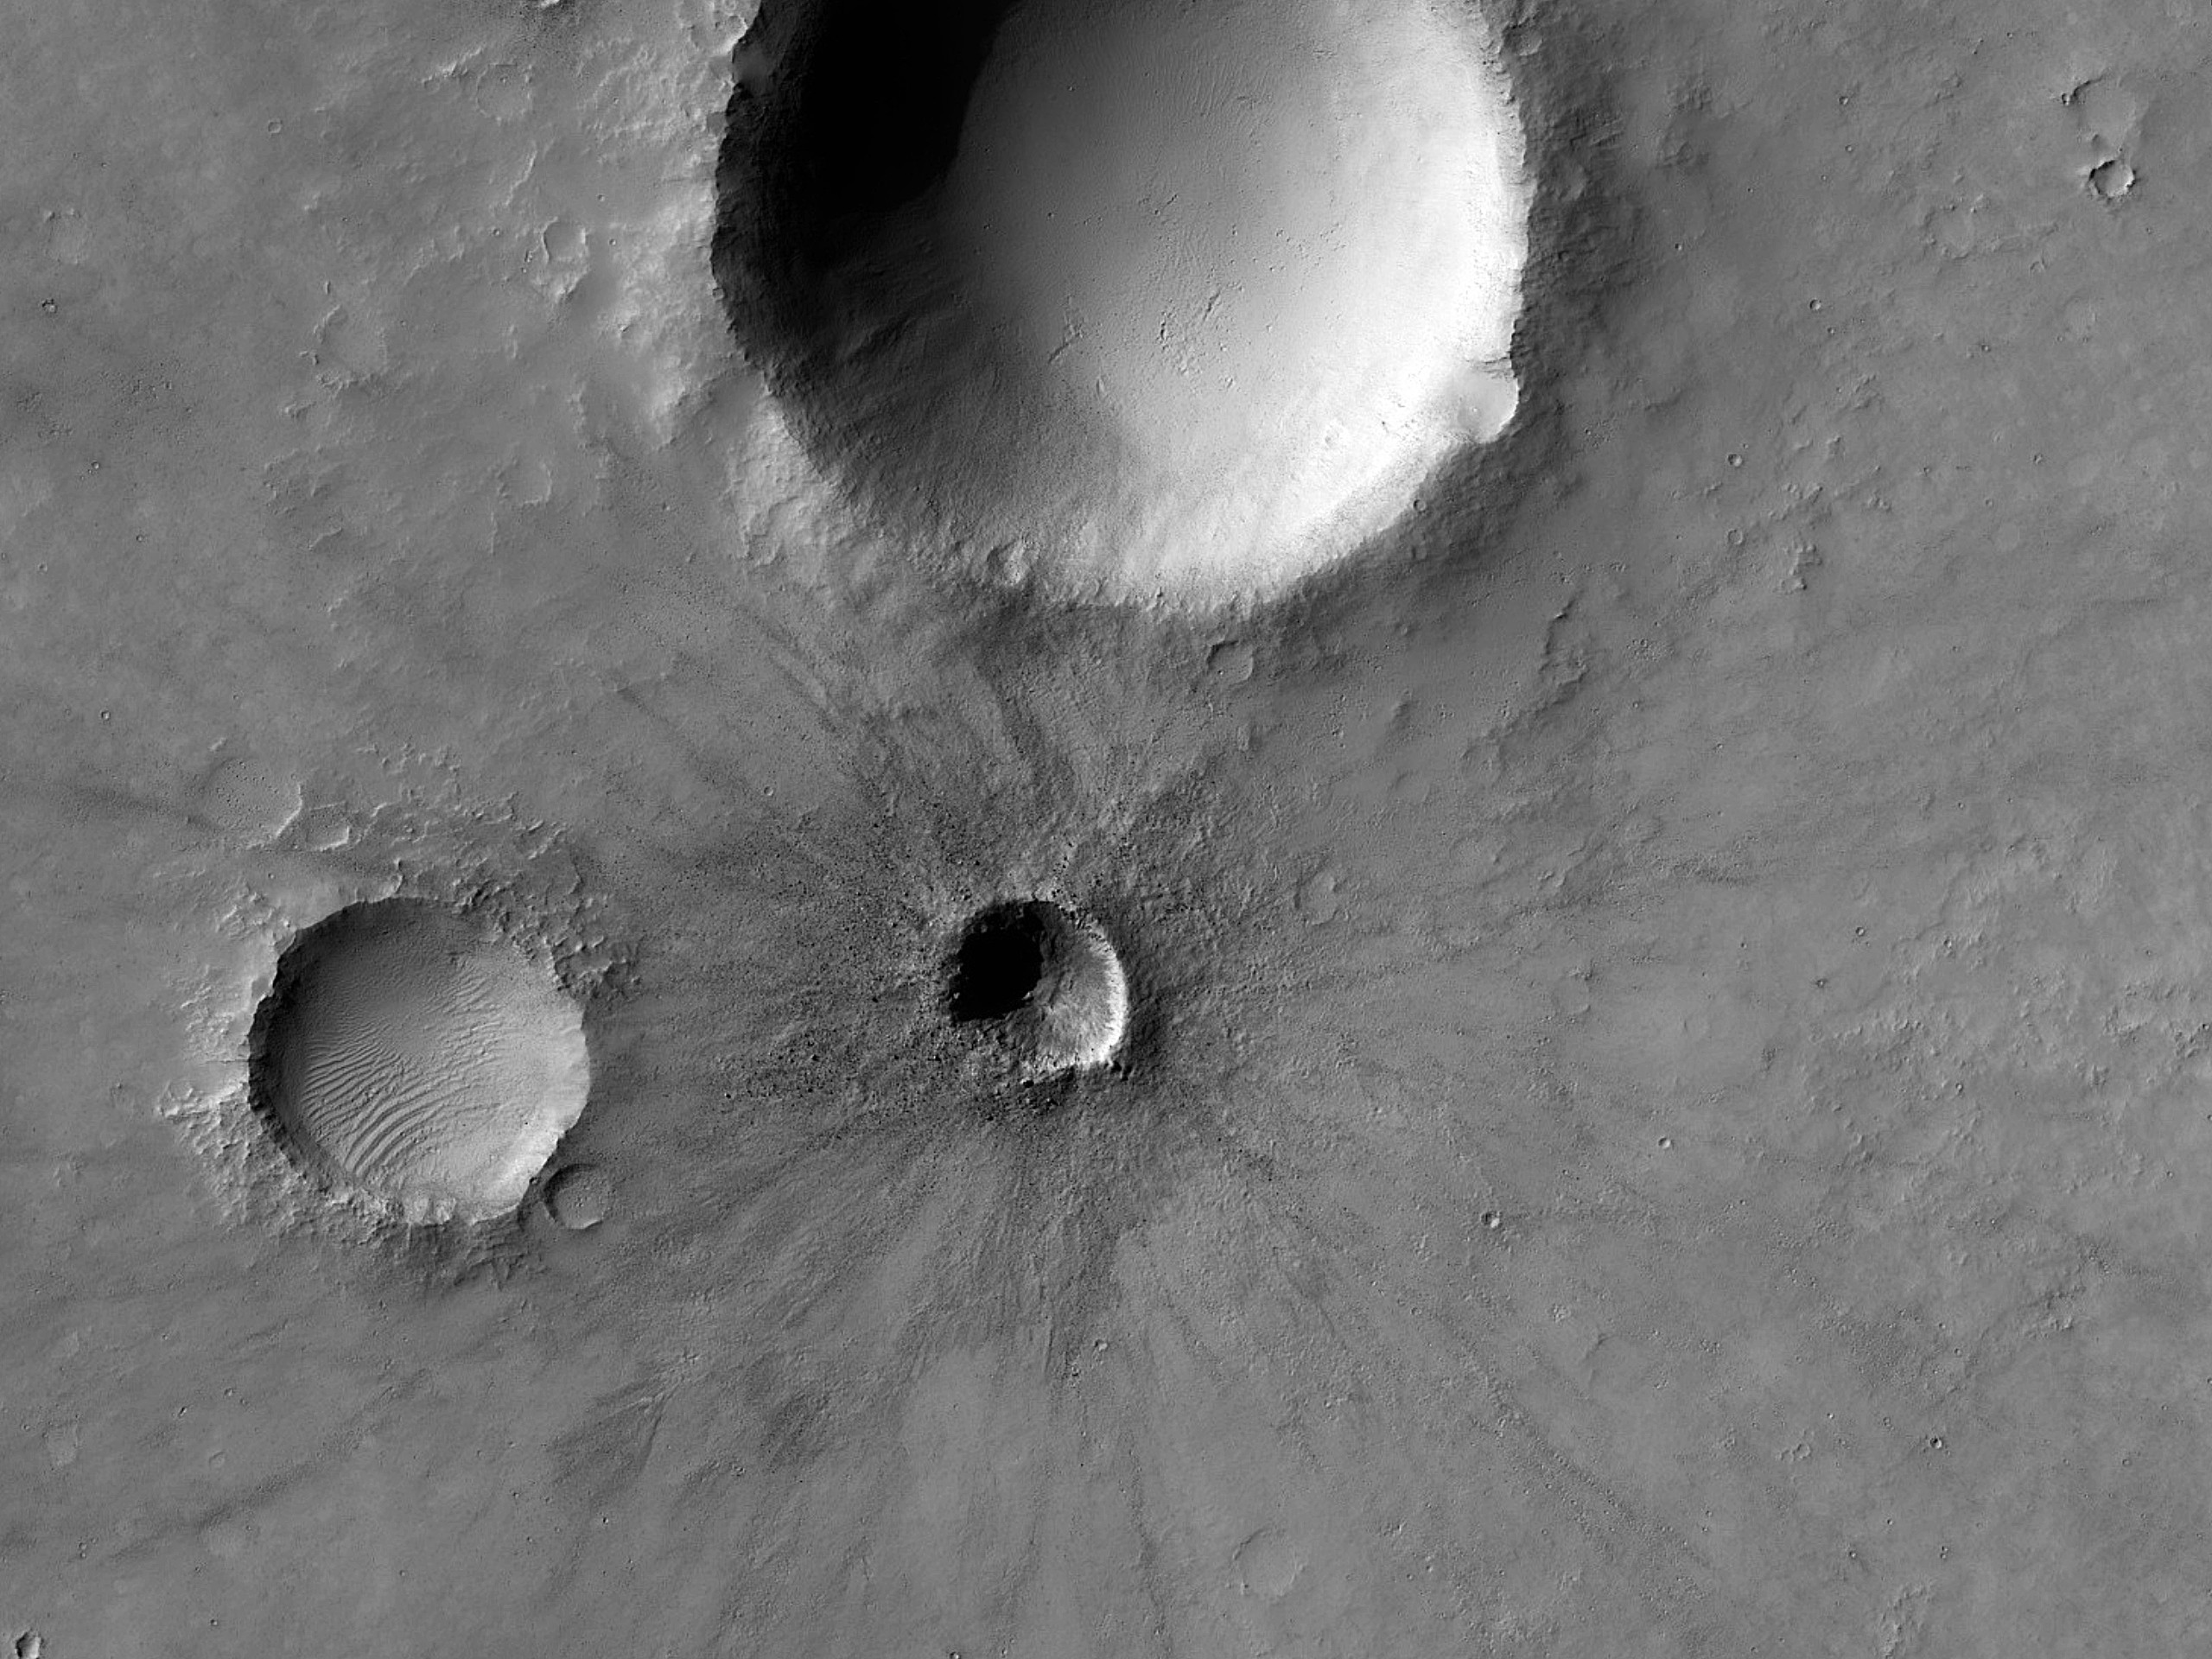 A Fresh, Rayed Crater